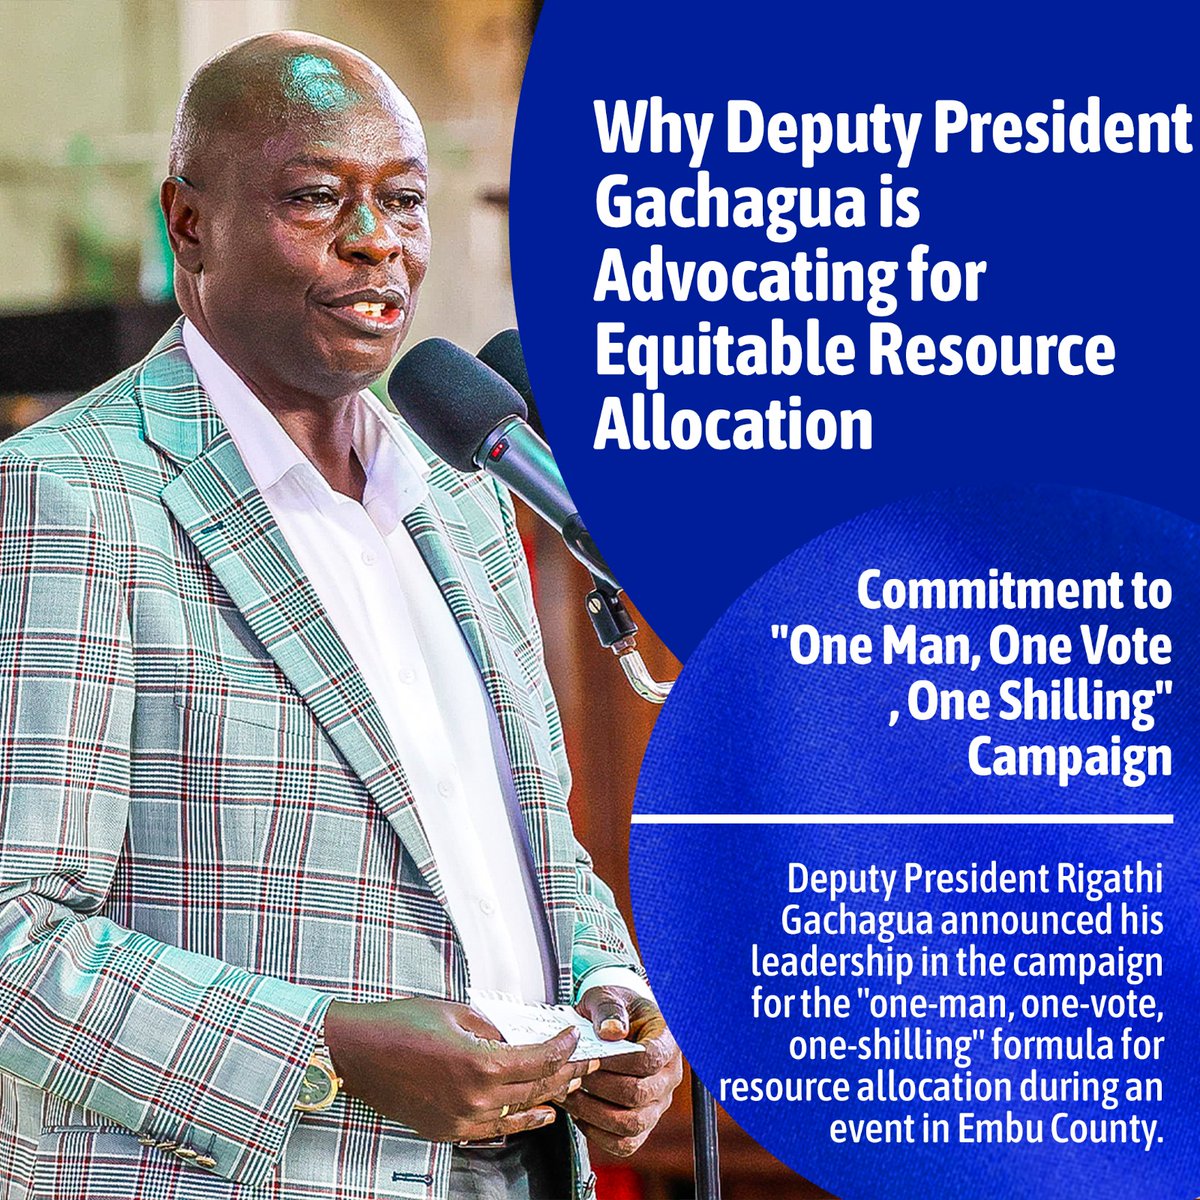 Deputy President Gachagua leads the 'One Man, One Vote, One Shilling' campaign, advocating for resource allocation based on population to ensure fairness across Kenya. 
#OneManOneVoteOneShilling
#RigathiOnAssignment
Fair resource allocation